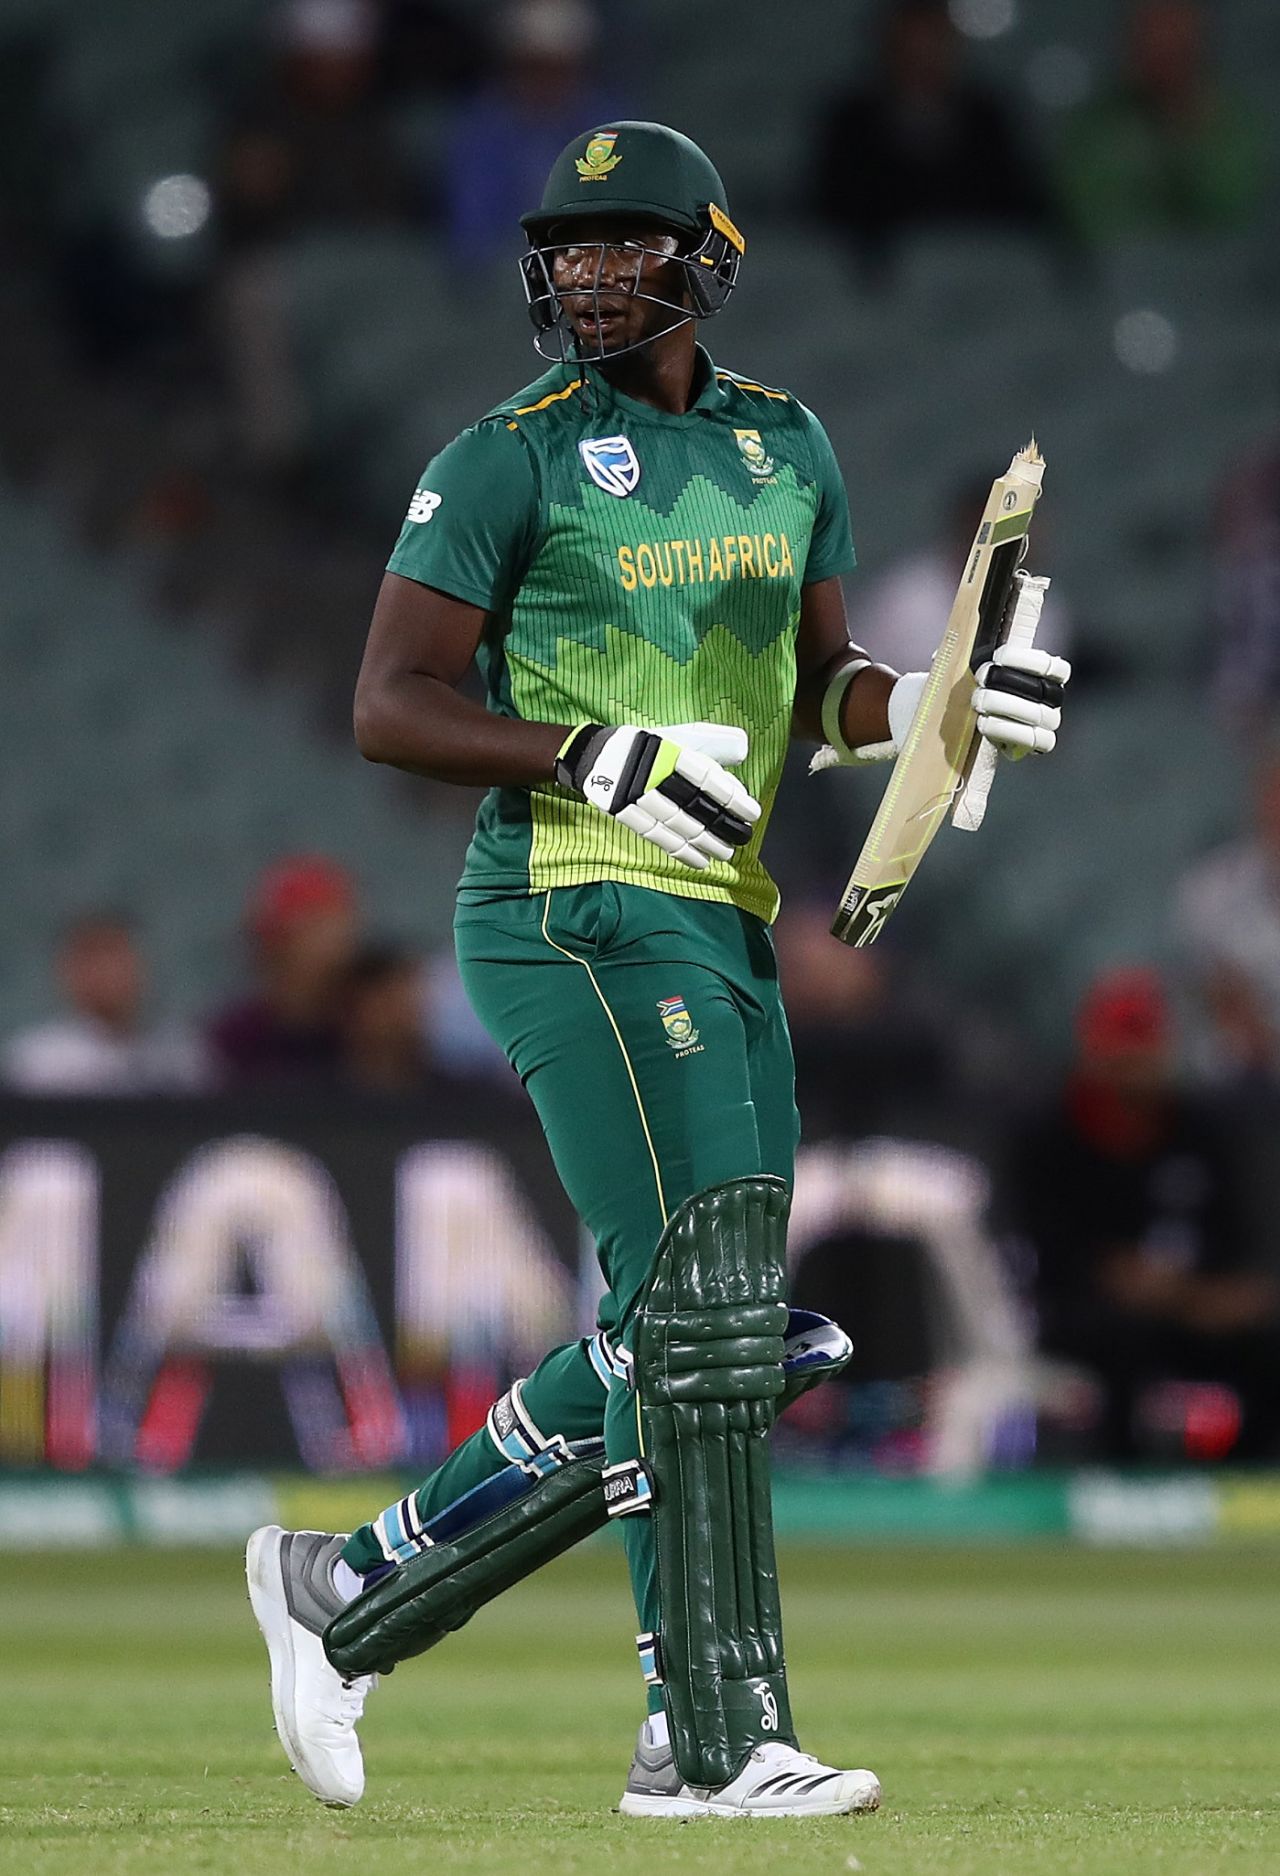 Lungi Ngidi had to deal with a broken bat mid-innings, Australia v South Africa, 2nd ODI, Adelaide, November 9, 2018